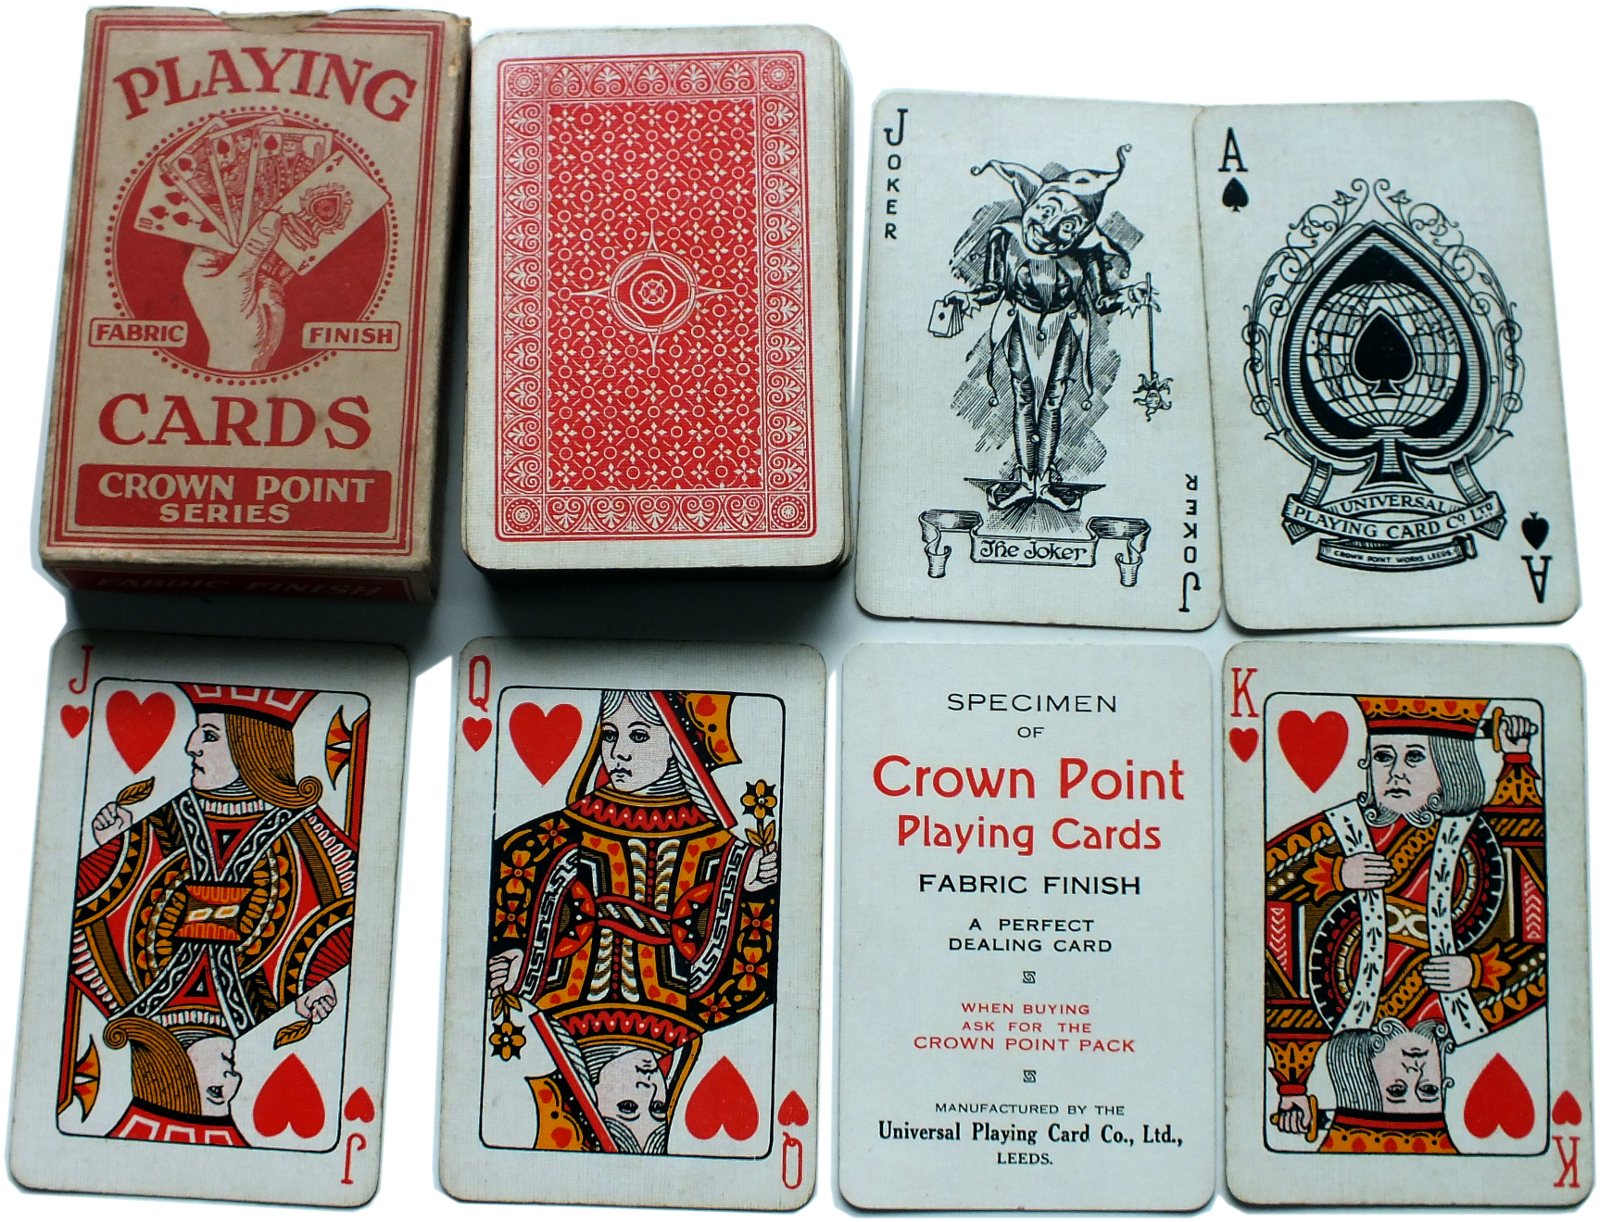 Crown Point Playing cards, c.1925-30